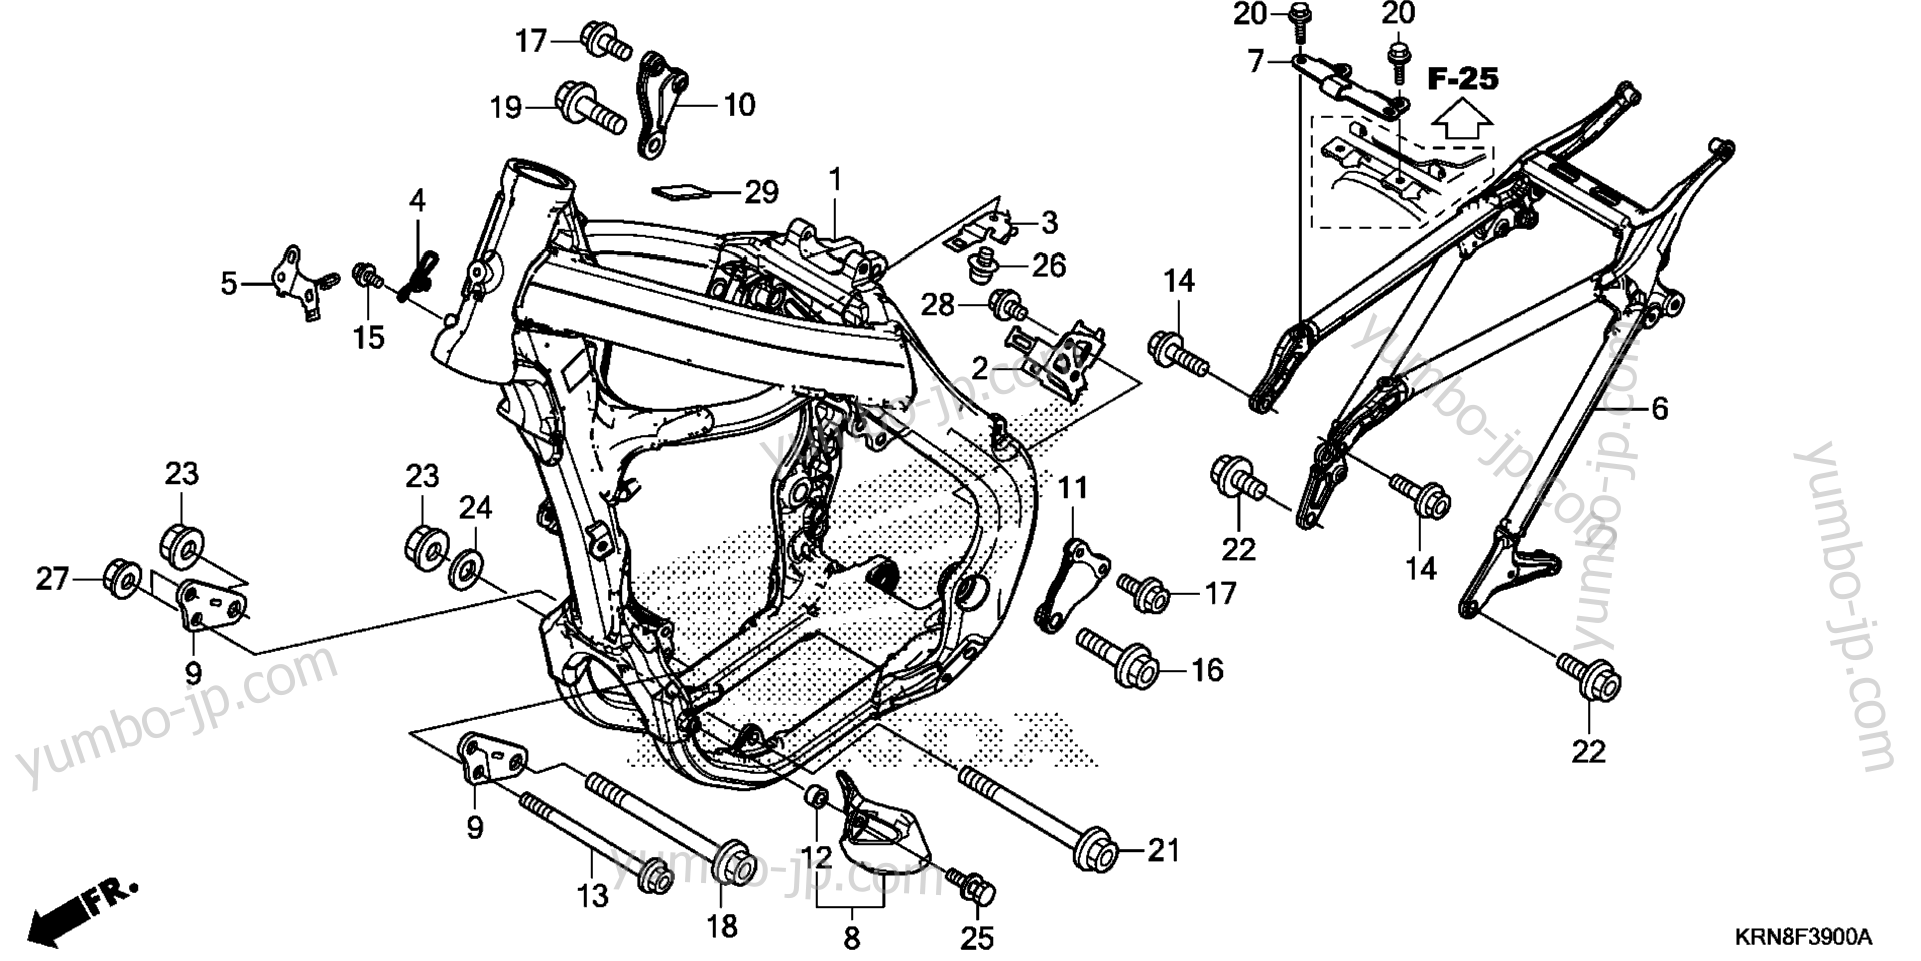 FRAME for motorcycles HONDA CRF250R AC 2014 year